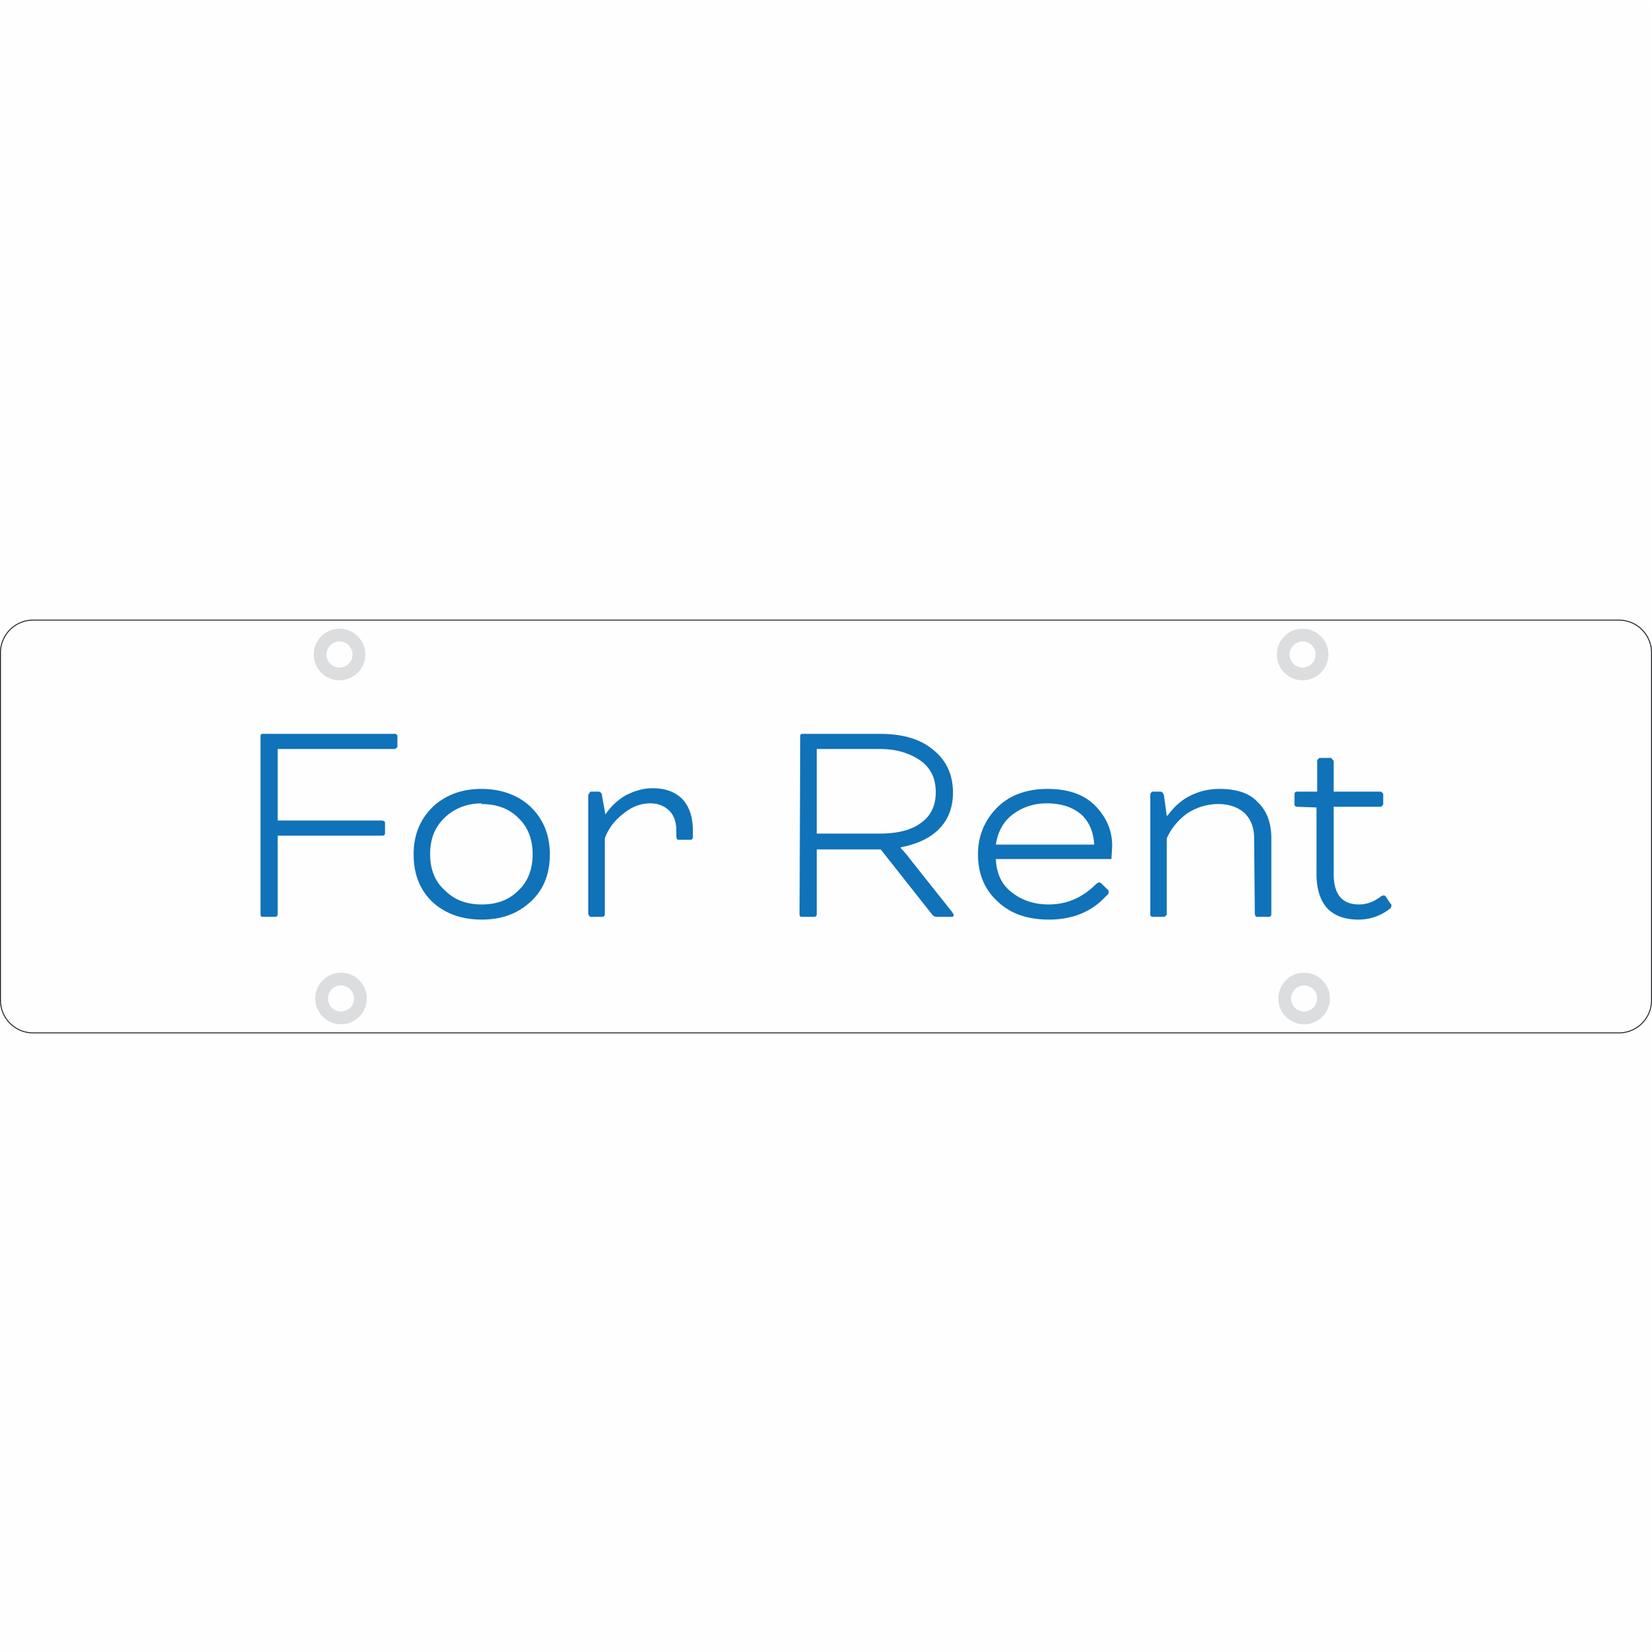 24" x 6" - For Rent